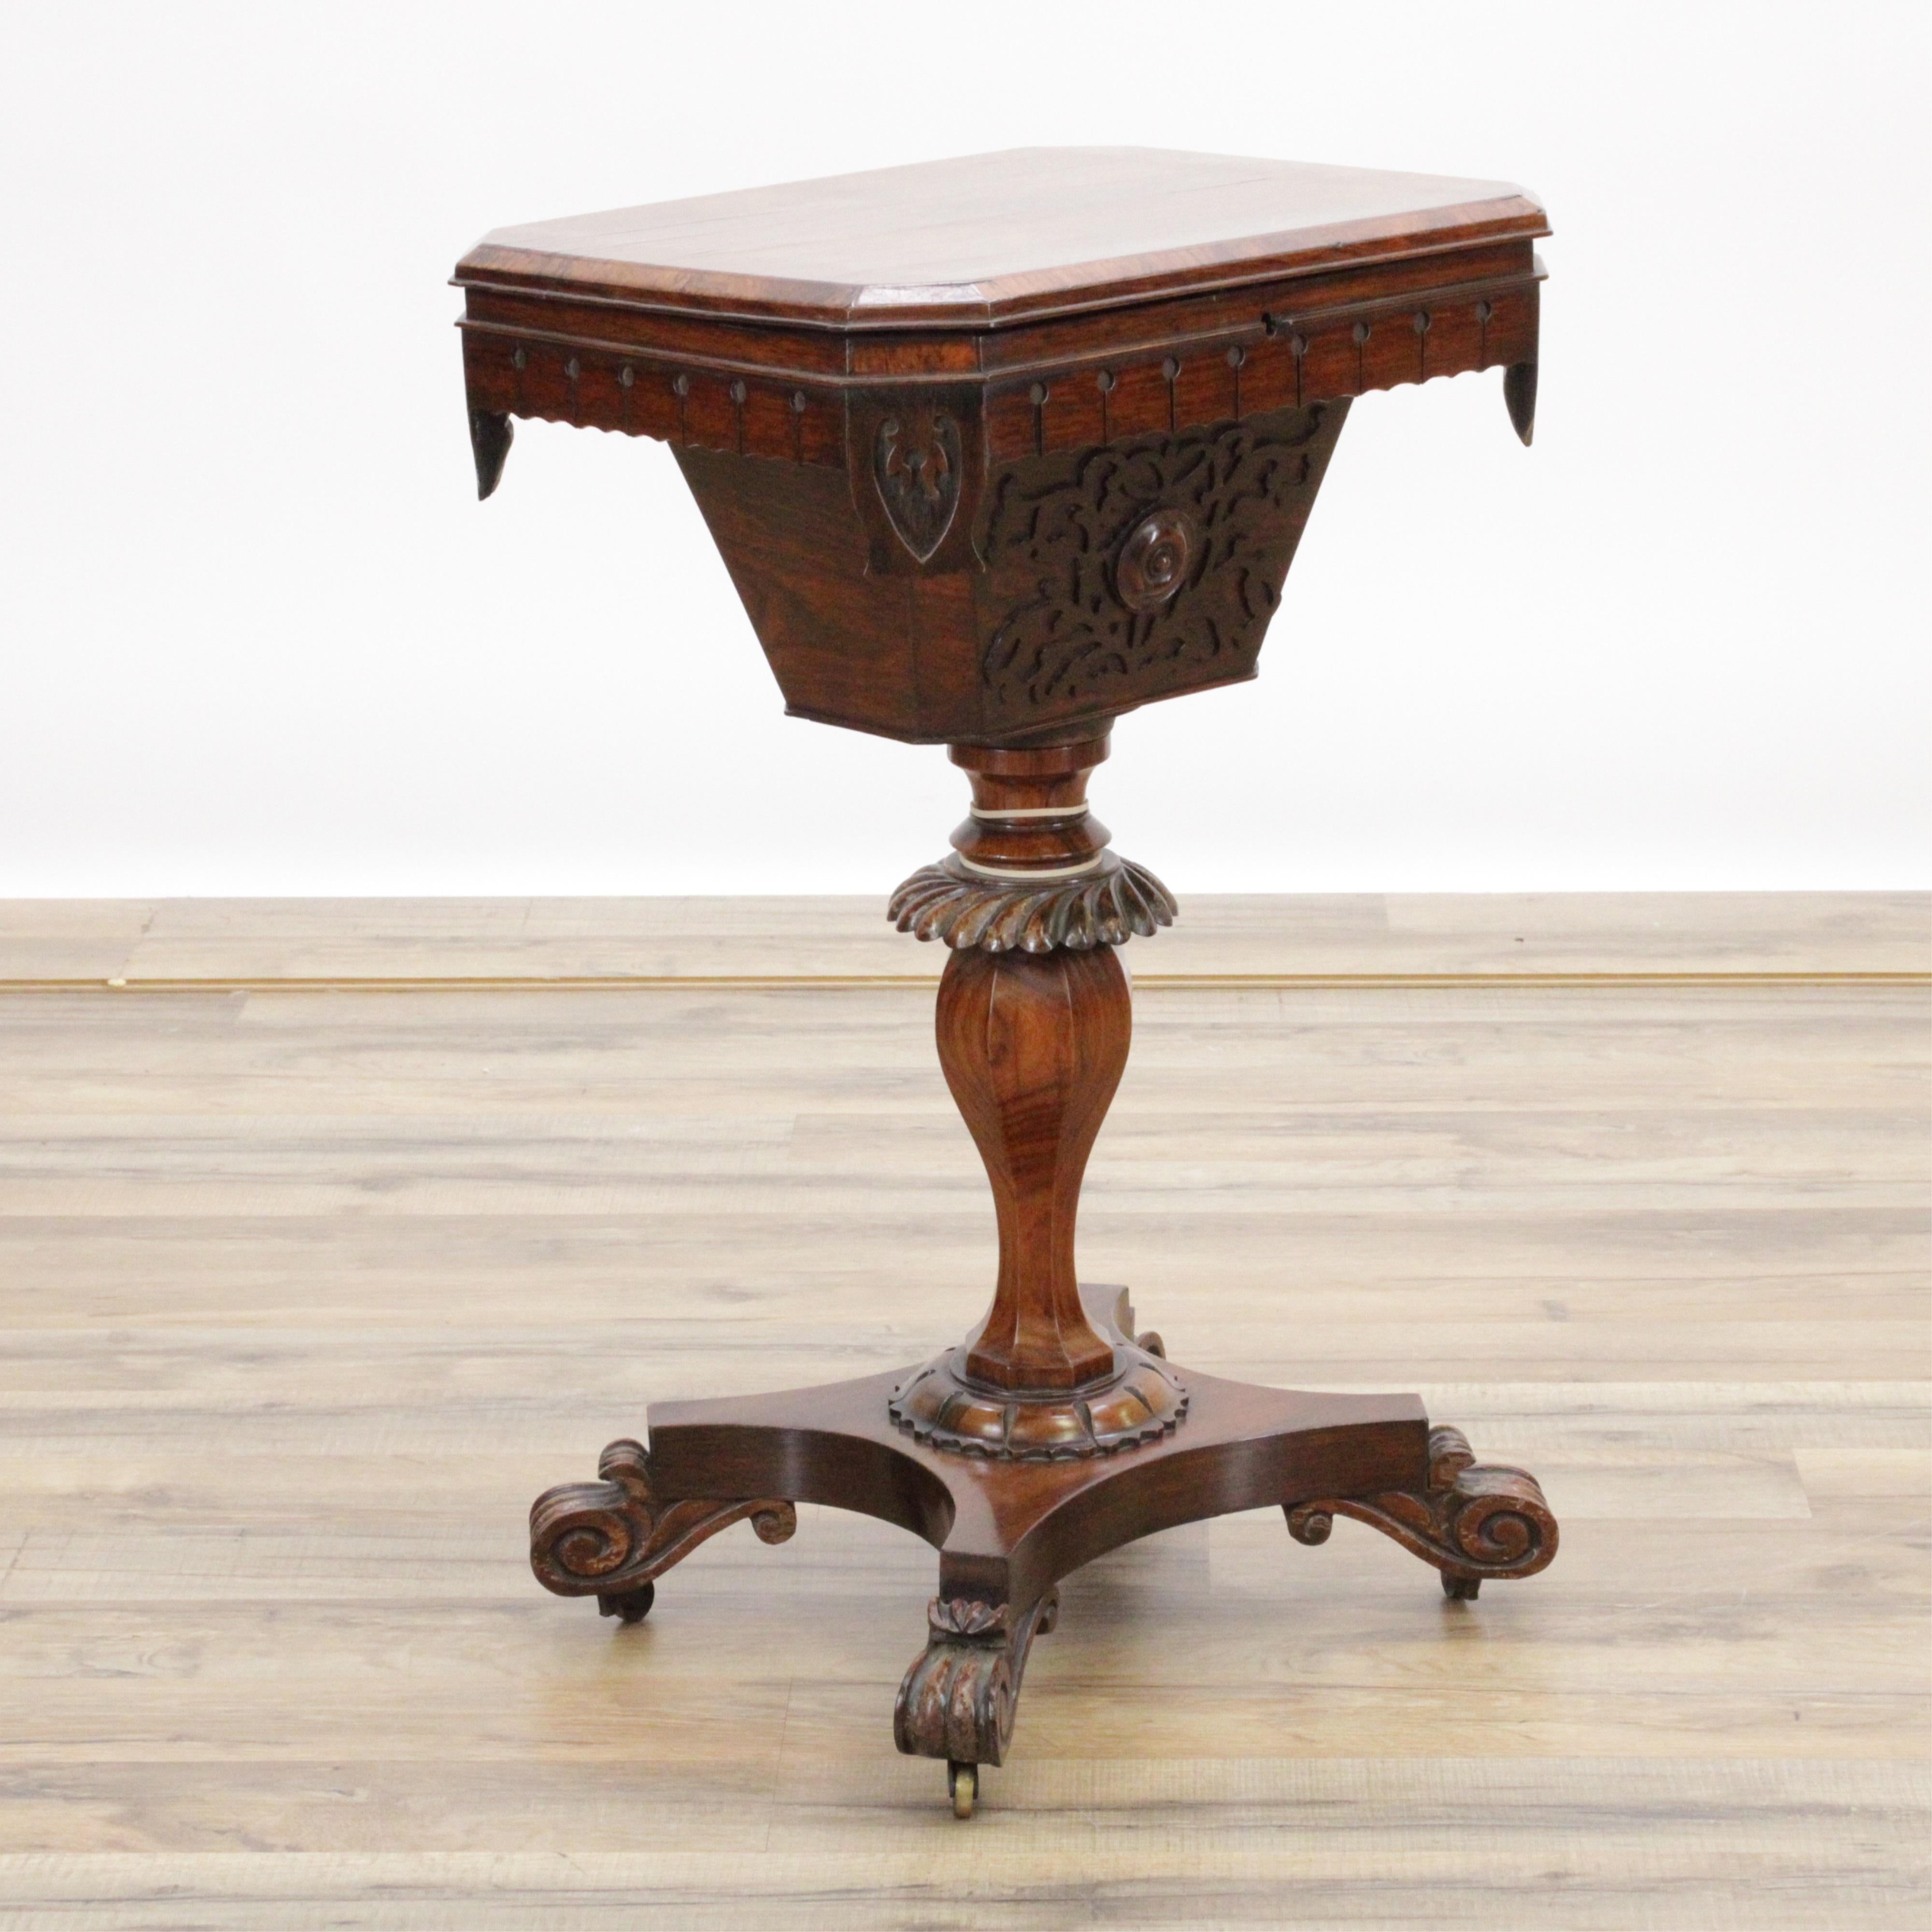 19th Century Early Victorian Rosewood sewing table
Lift top, applied and carved decoration.
Provenance: From the private collection of Steven Stark
Measures: 27.5